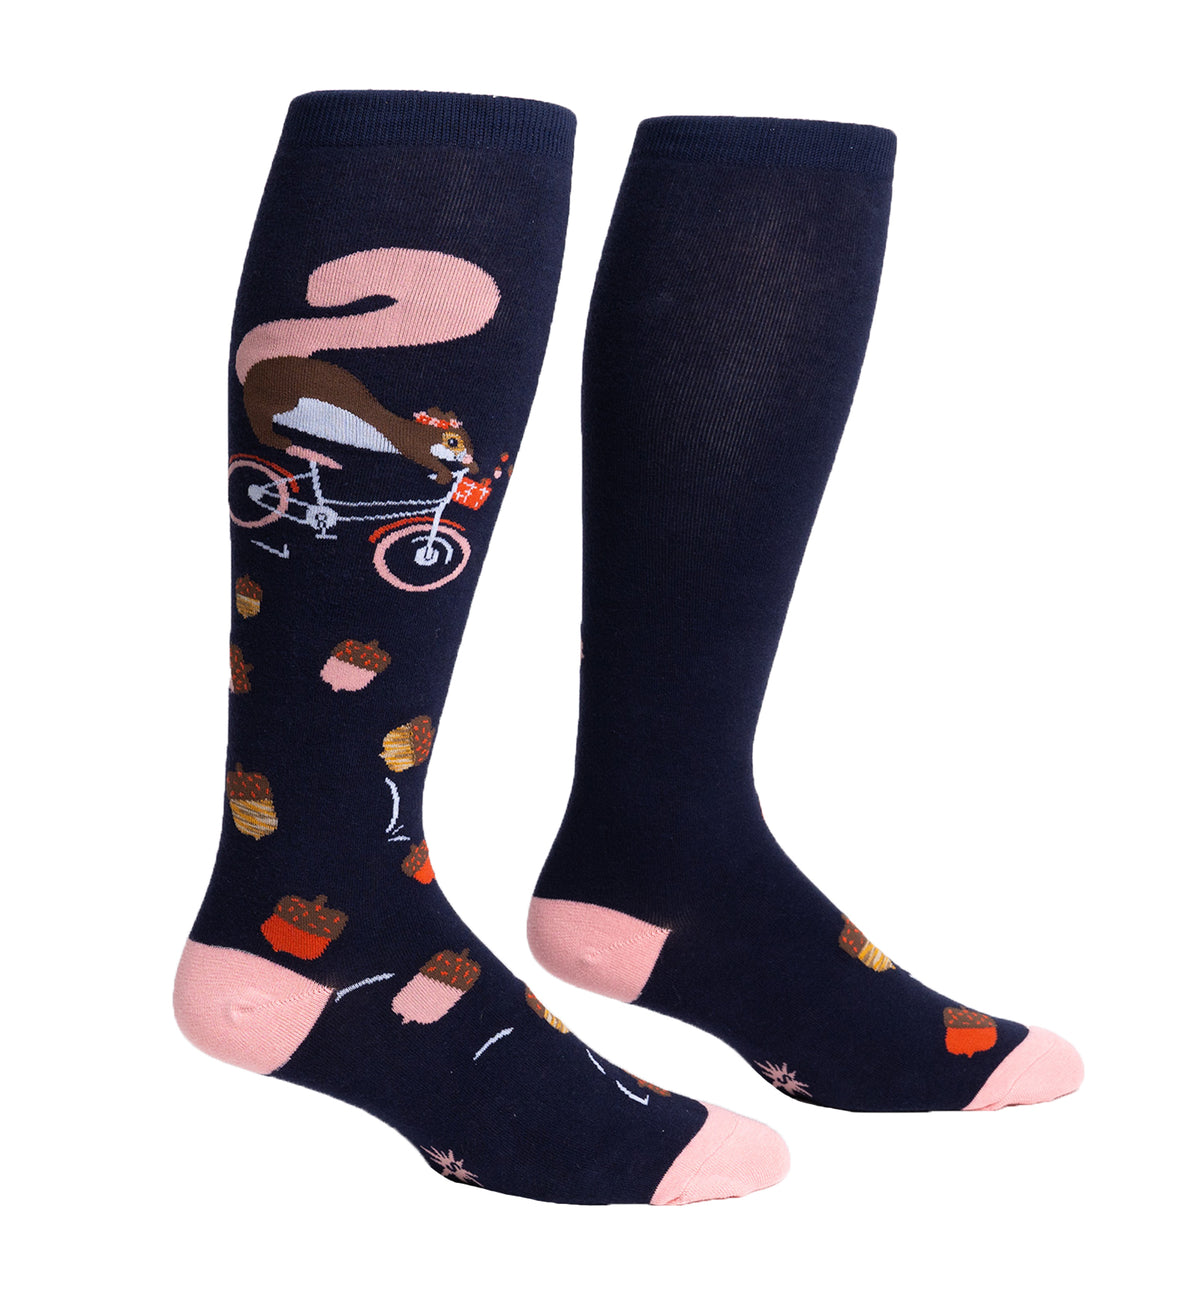 SOCK it to me Unisex Stretch-It Knee High Socks (S0160),Feeling Squirrelly - Feeling Squirrelly,One Size